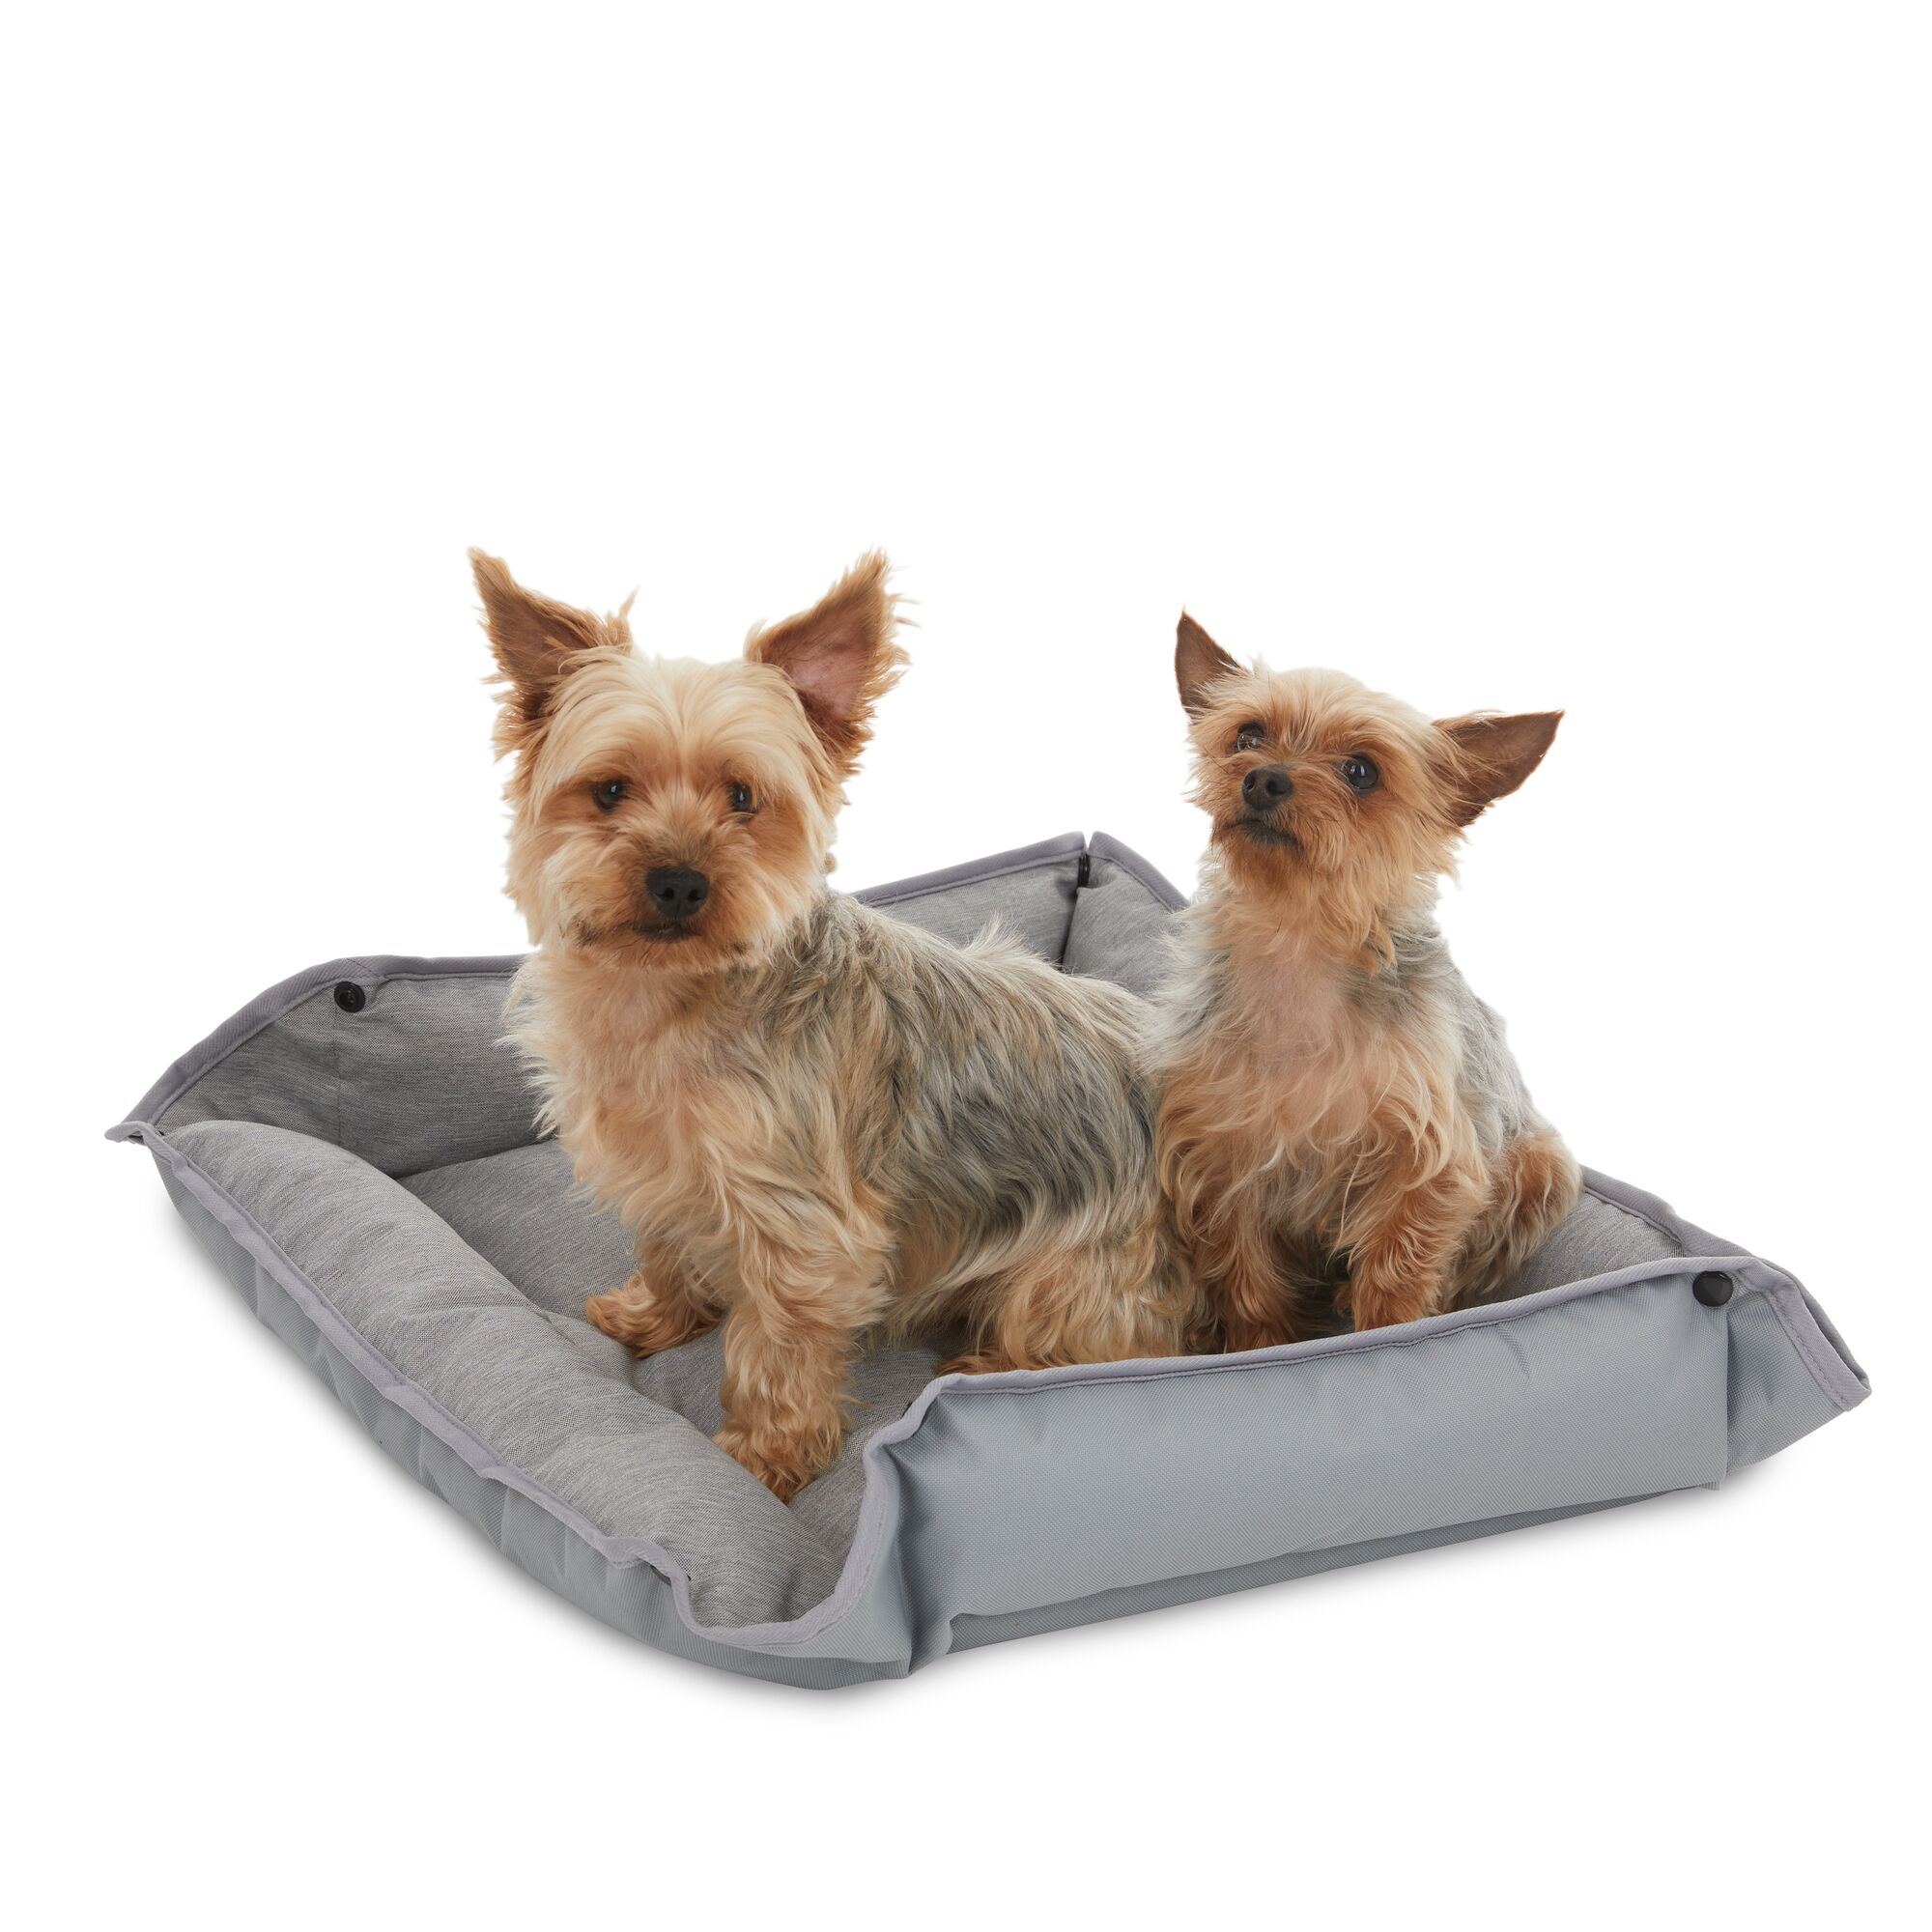 Two yorkie dogs on one gray plush pet bed